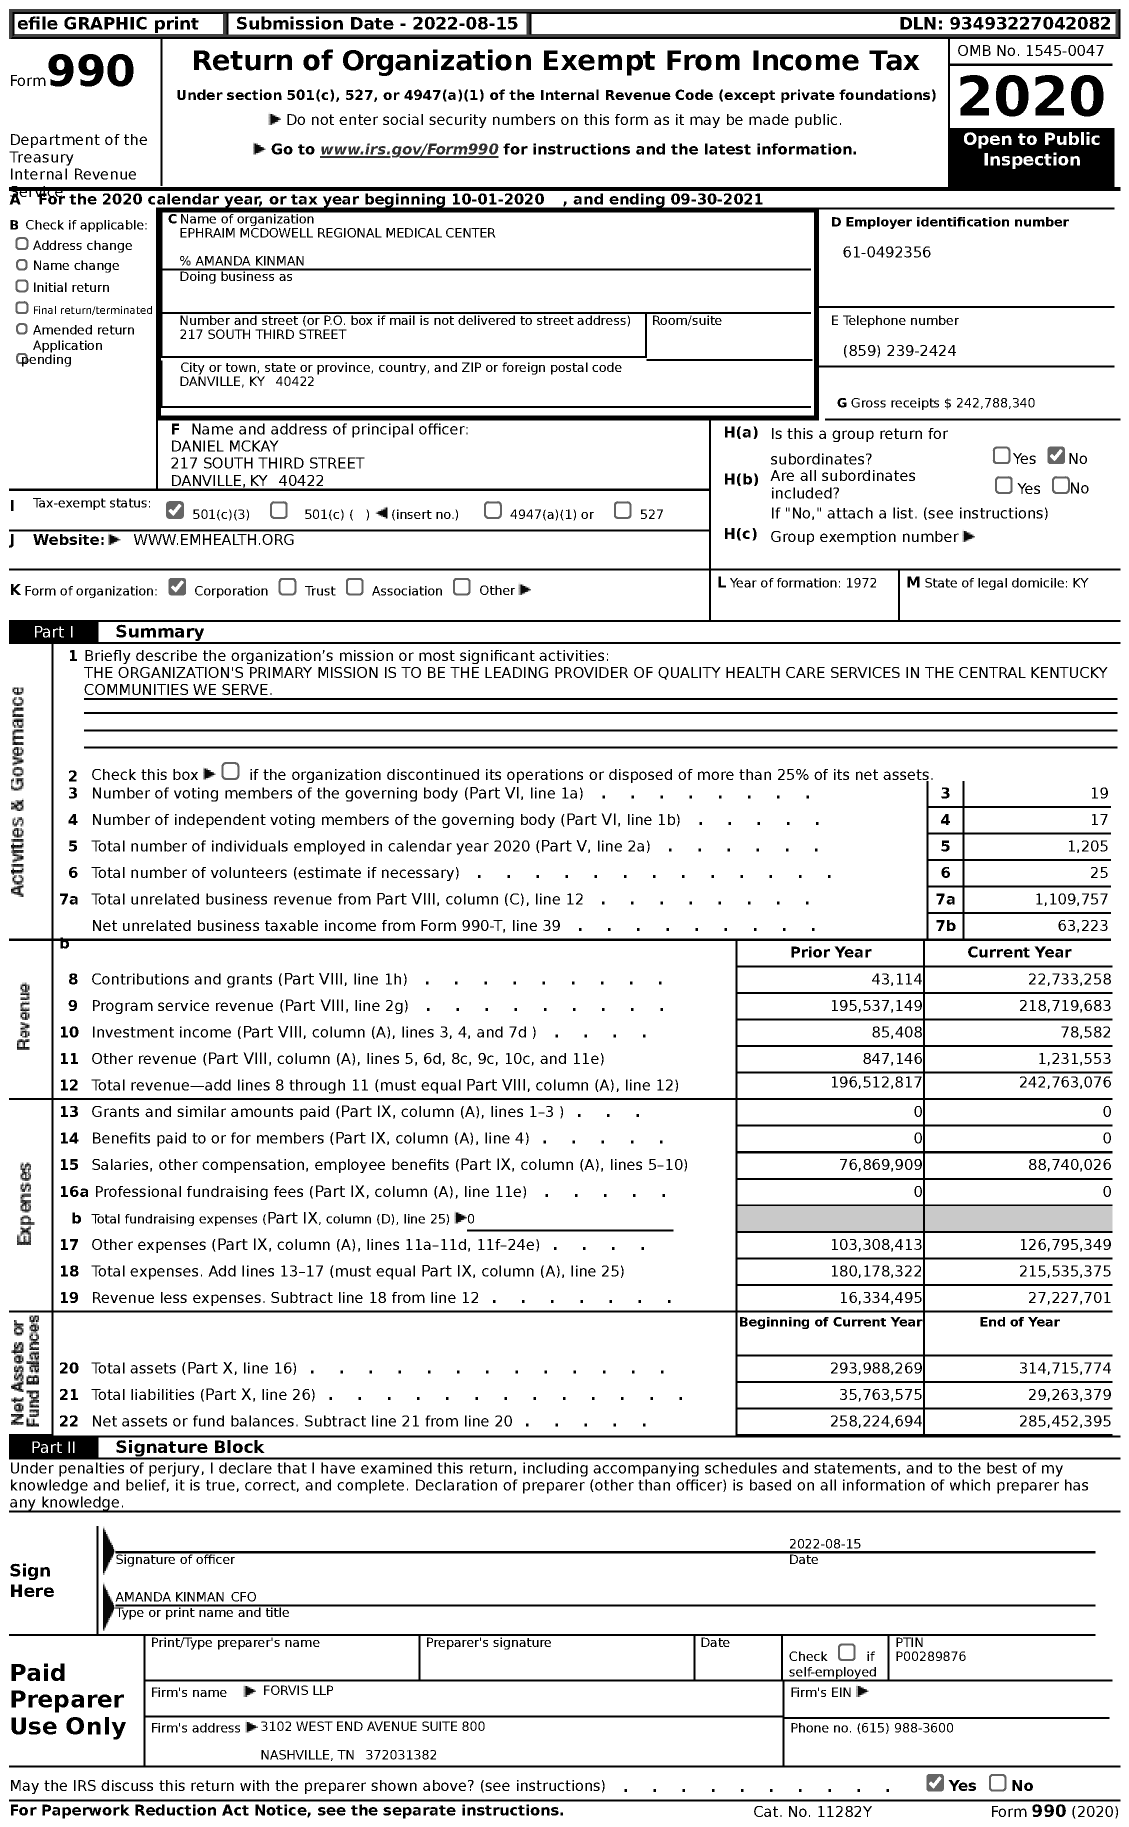 Image of first page of 2020 Form 990 for Ephraim Mcdowell Regional Medical Center